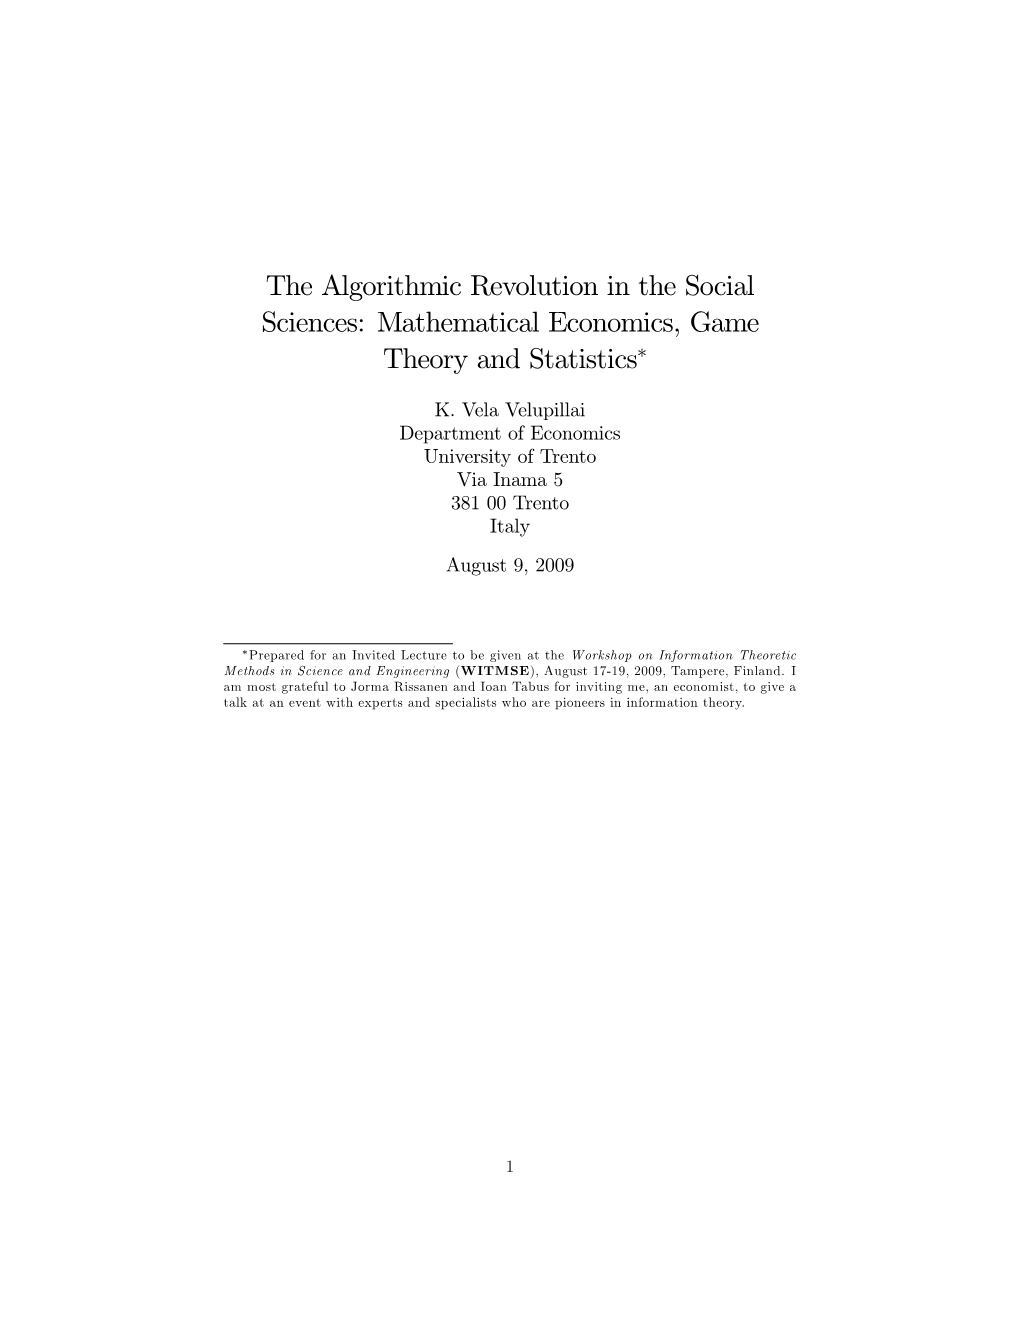 The Algorithmic Revolution in the Social Sciences: Mathematical Economics, Game Theory and Statistics